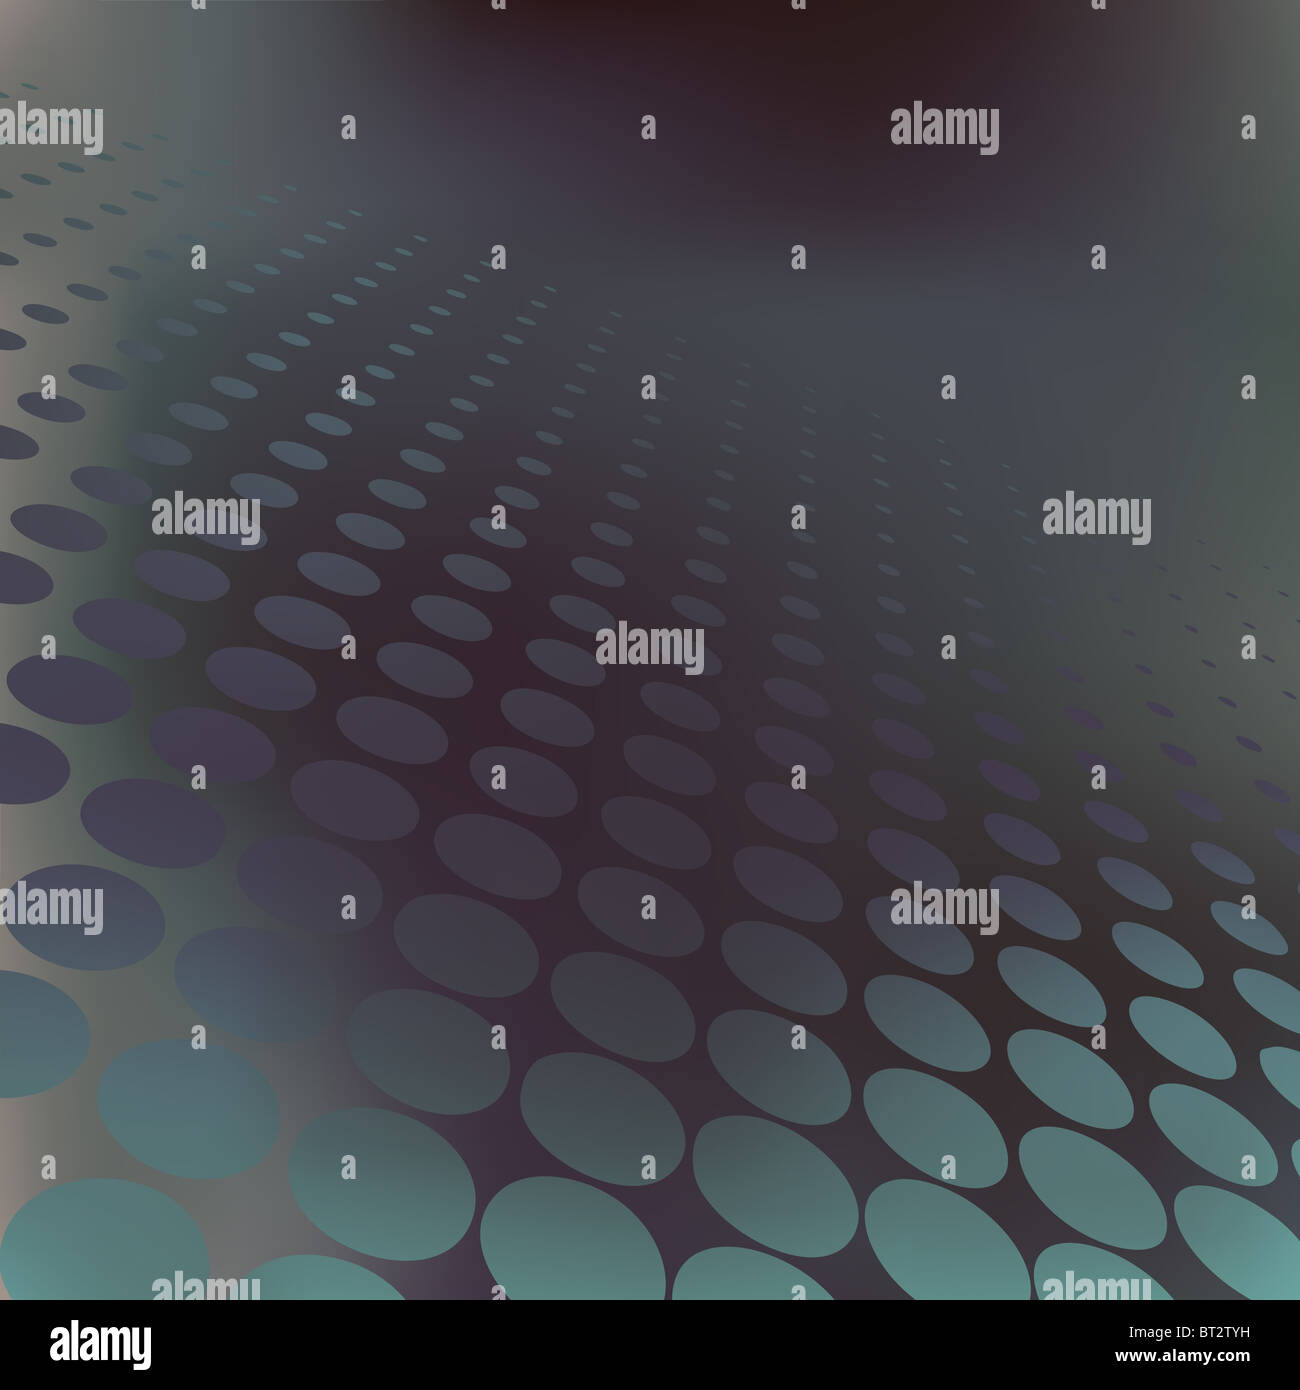 Abstract background of dark halftone dots Stock Photo